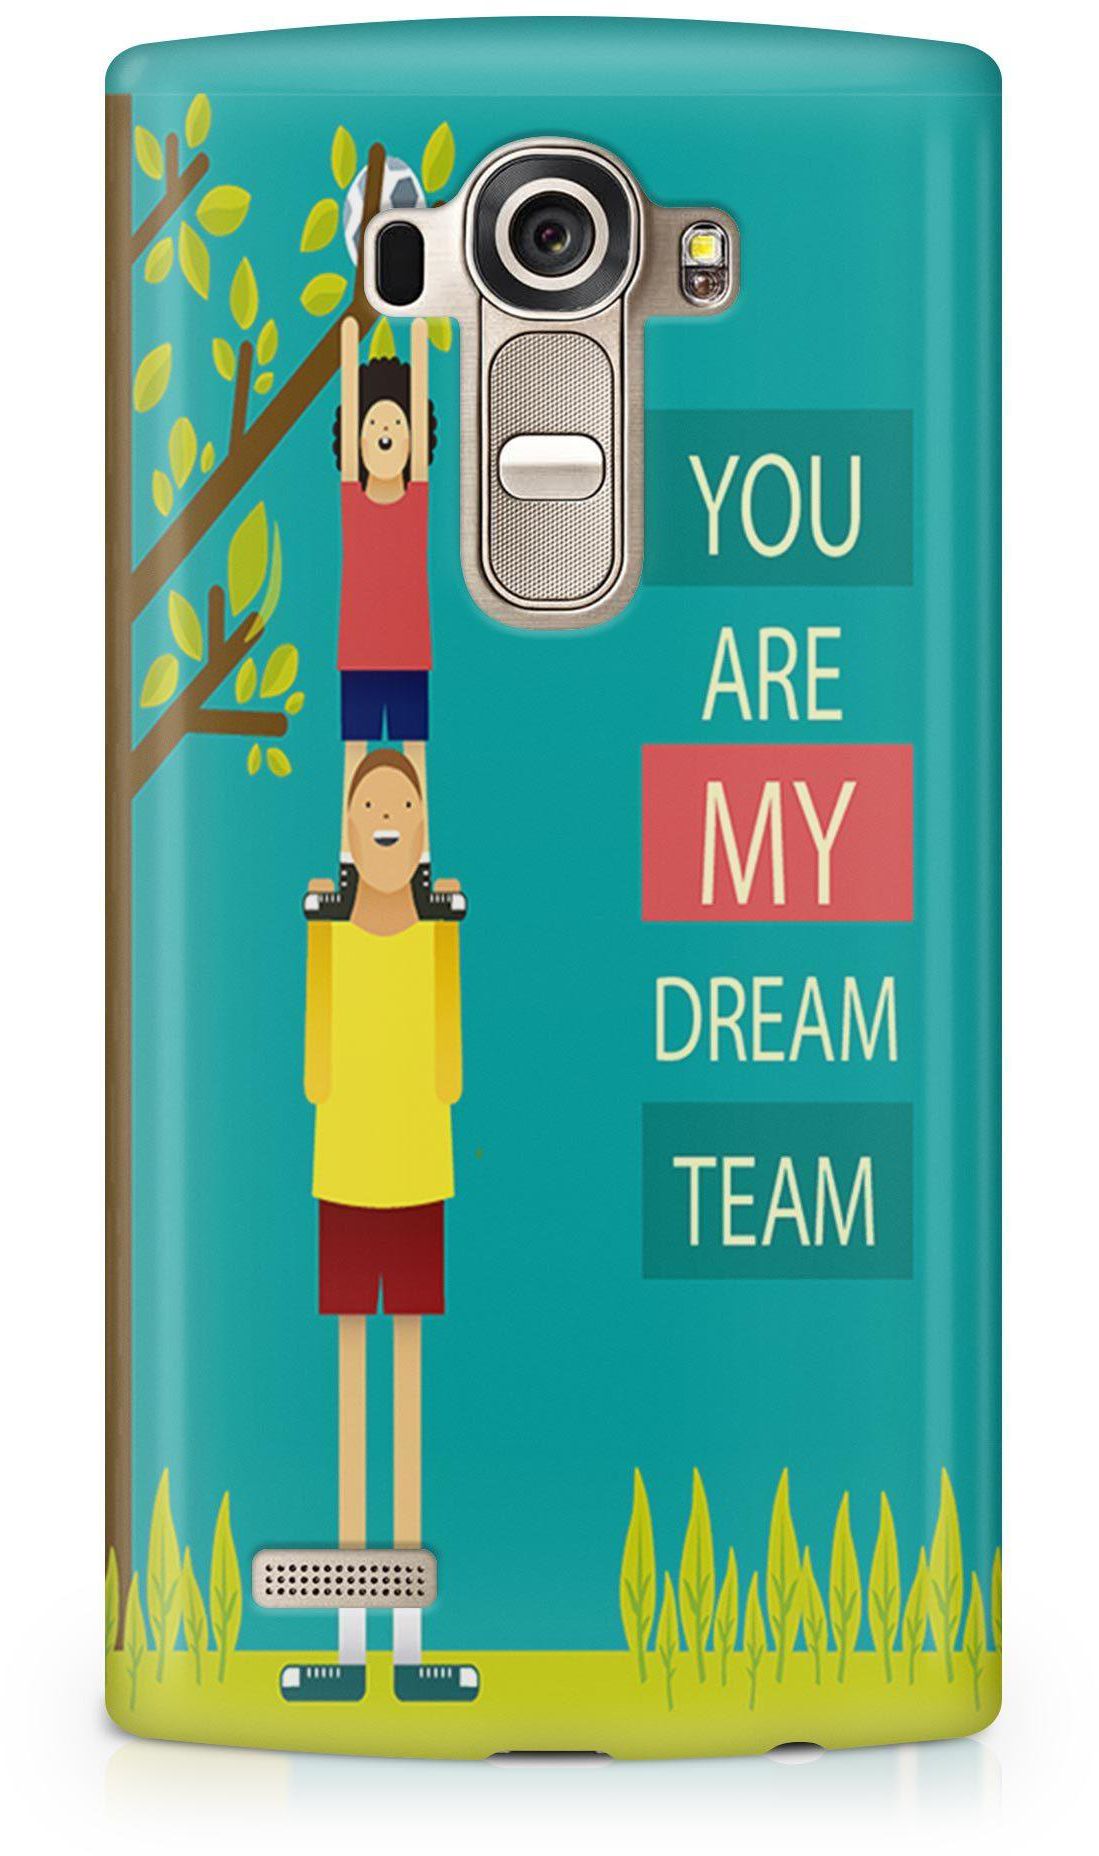 You are My Dream Team Children Football Case Cover for LG G4